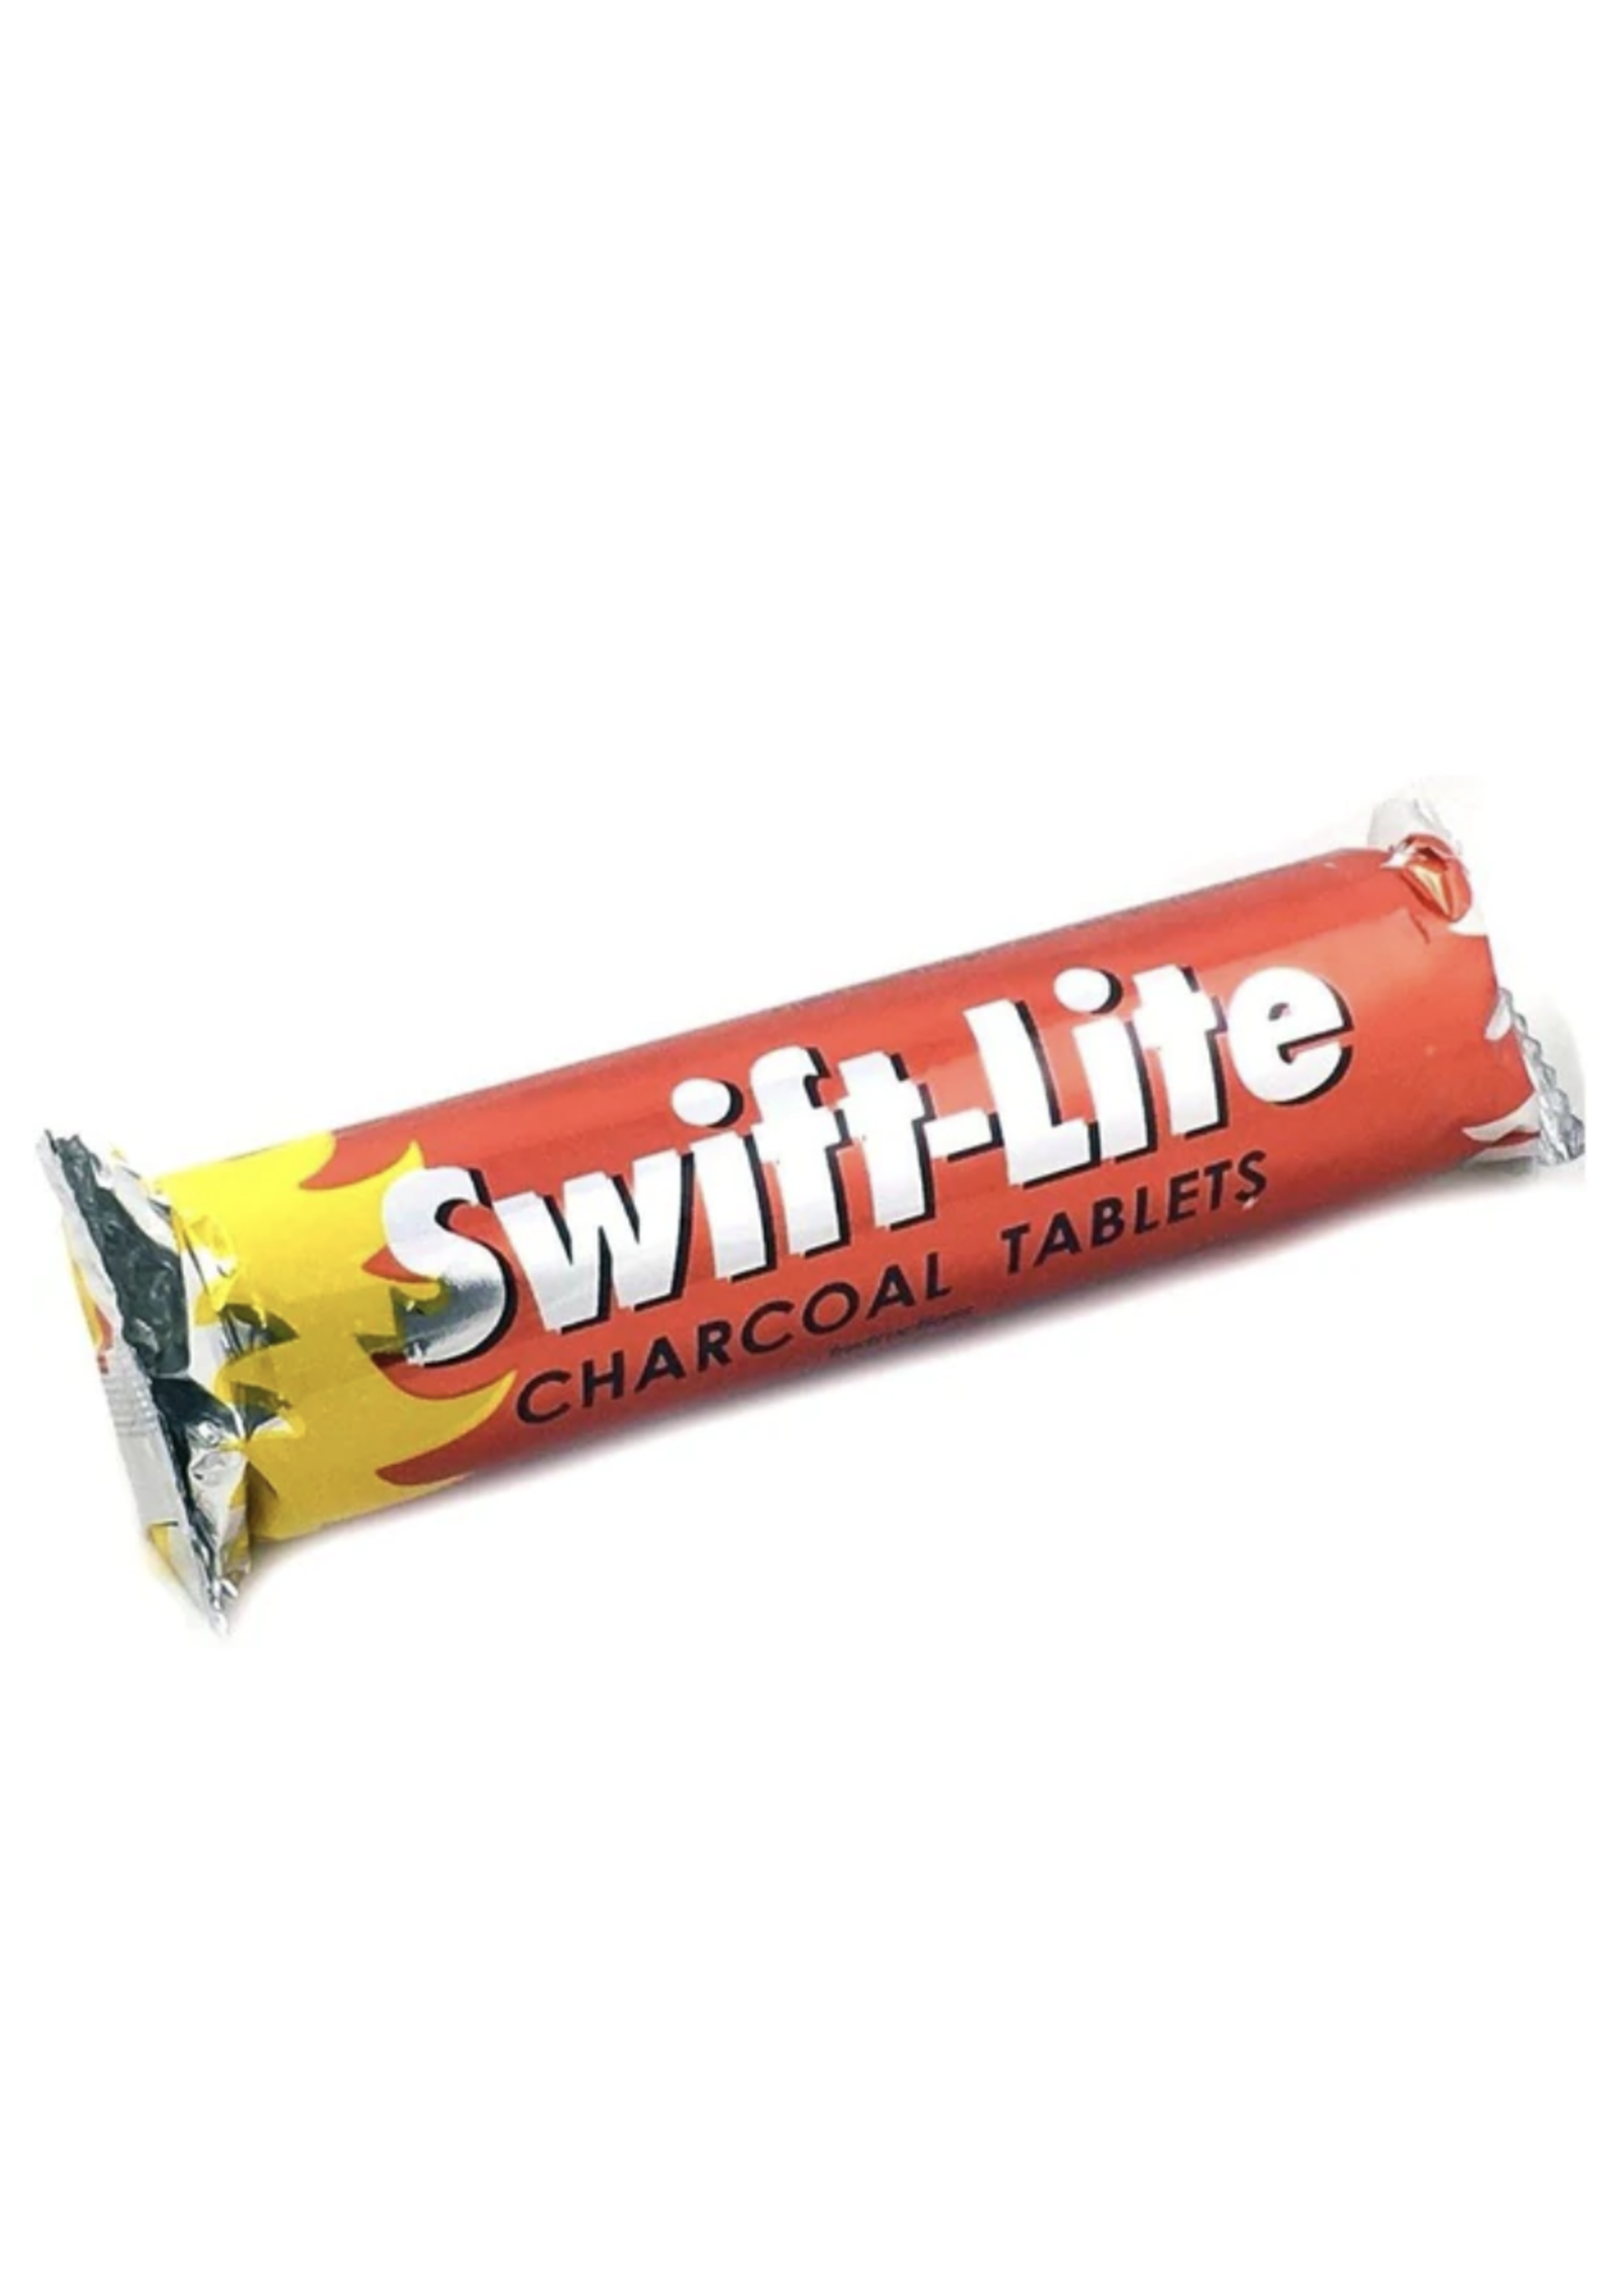 Swift Lite Charcoal - 10 Tablet Roll